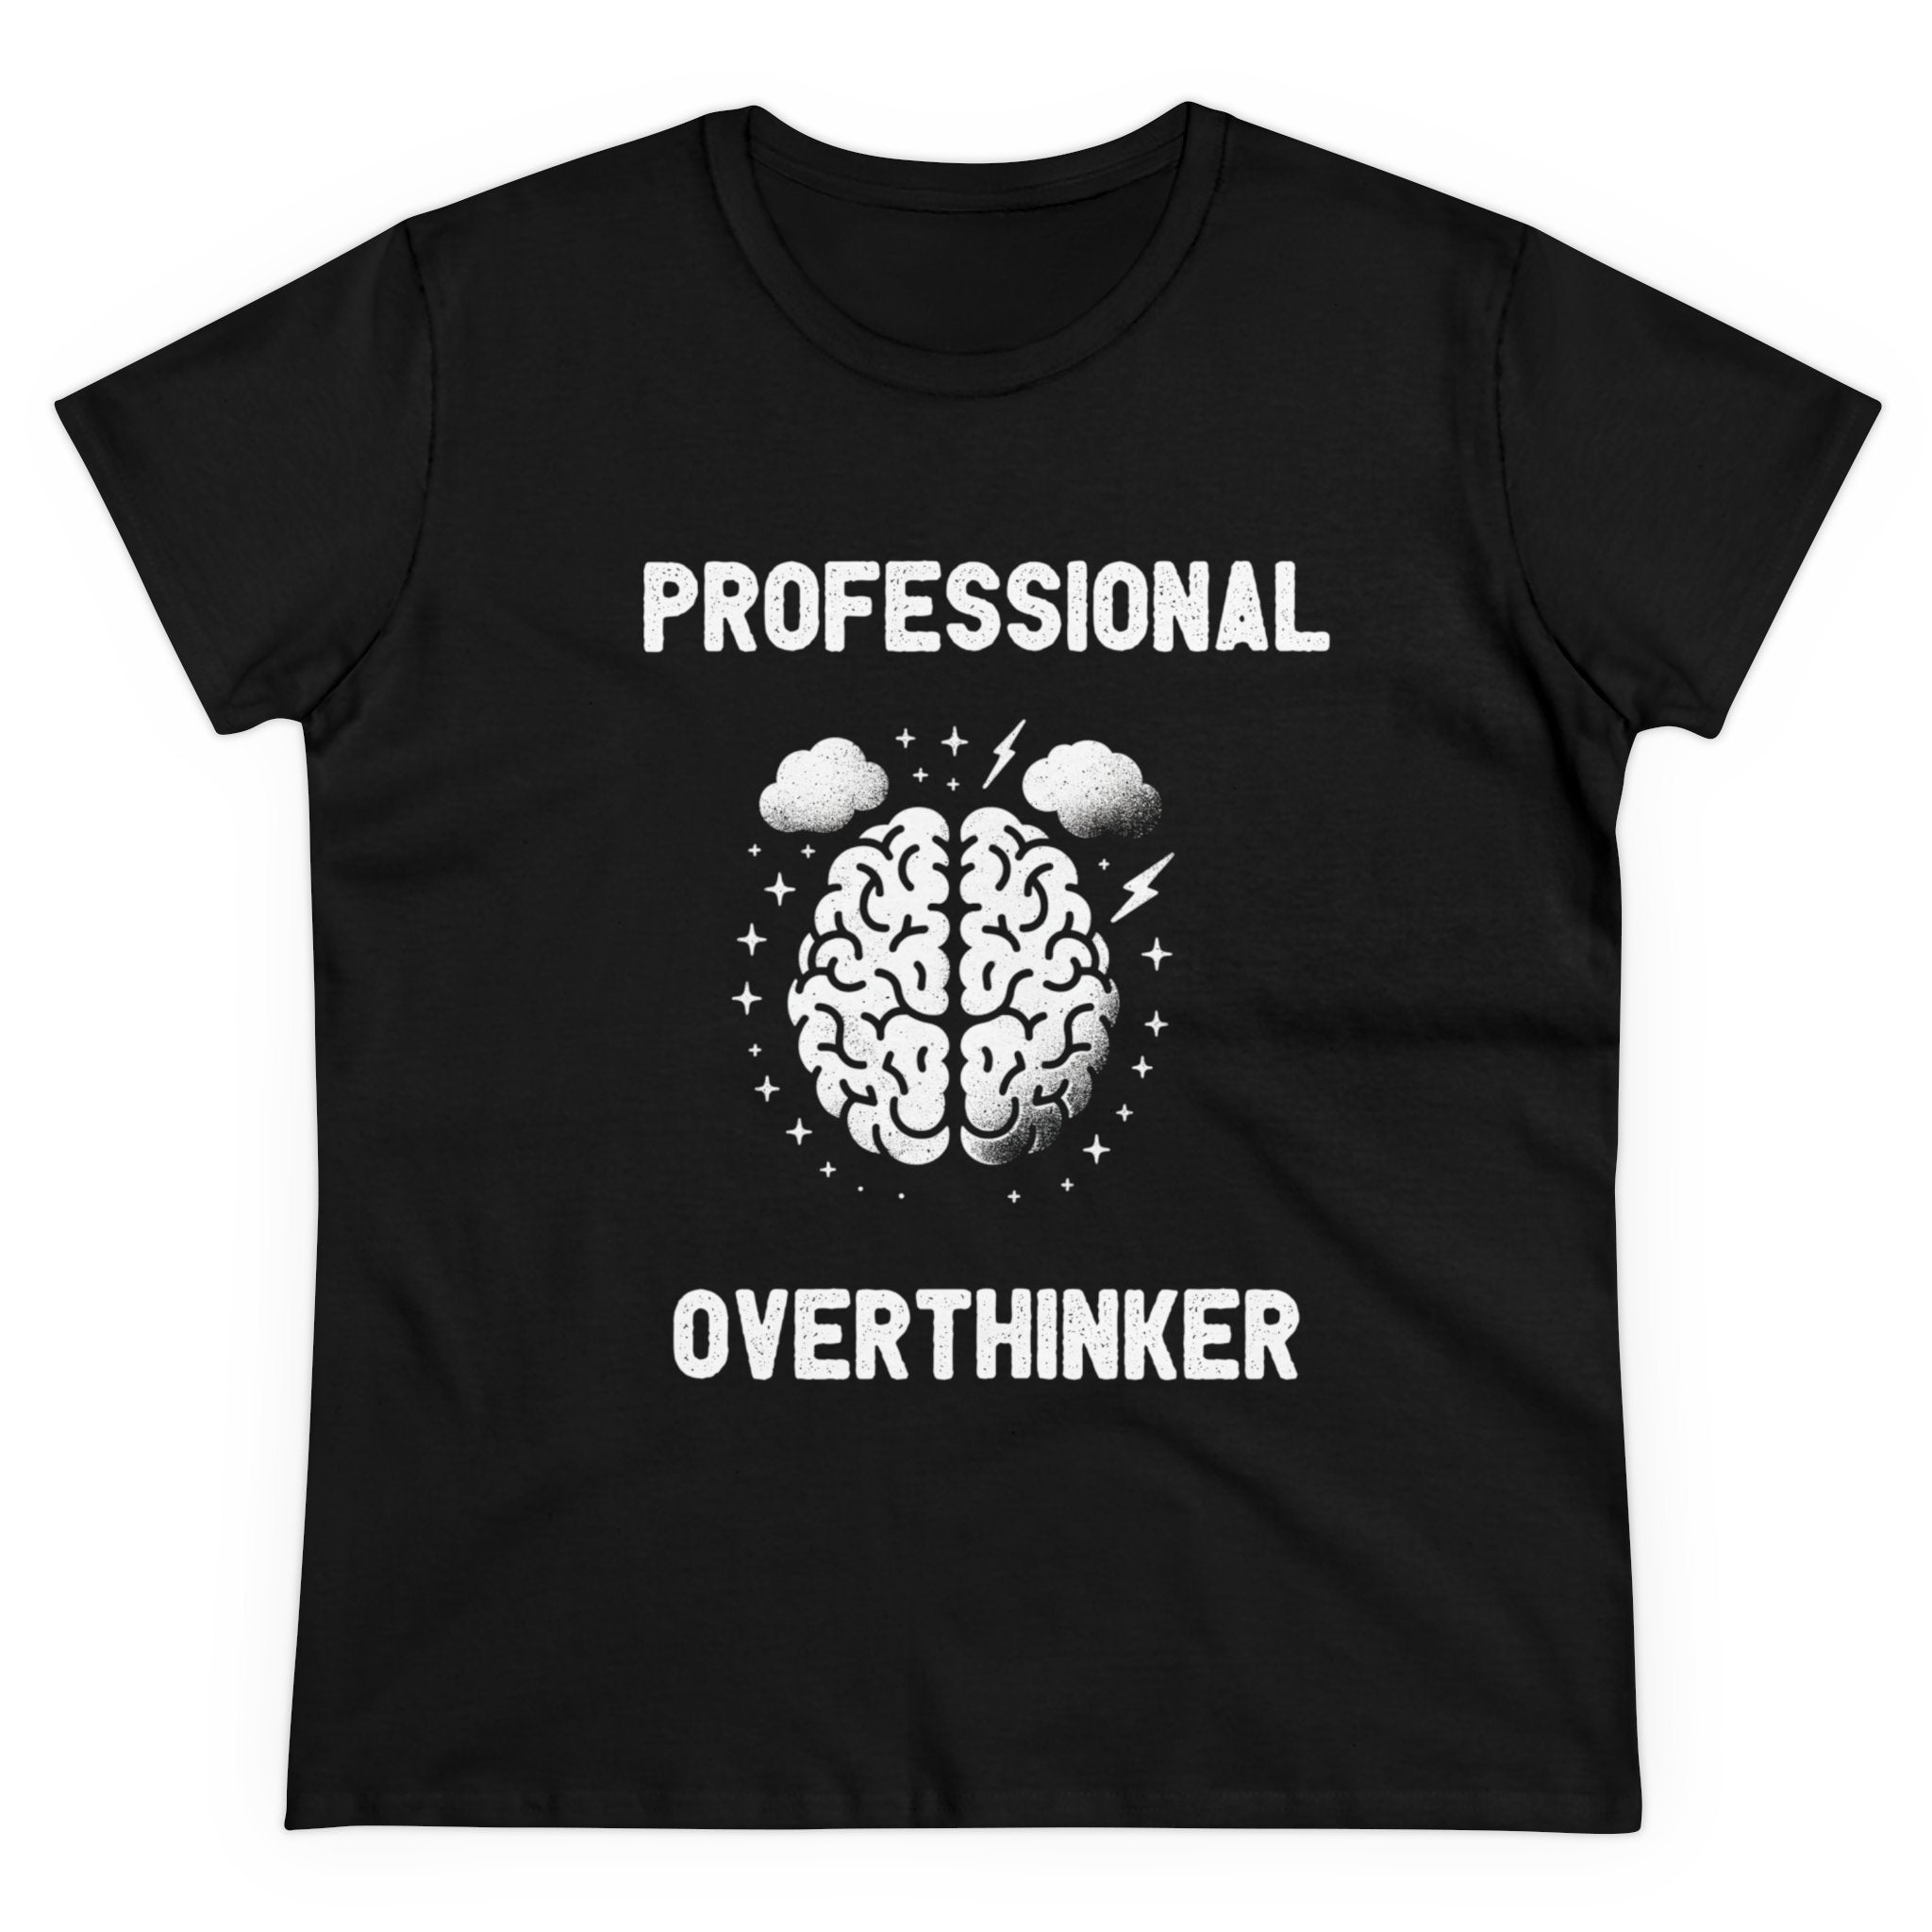 Black T-shirt with a brain illustration surrounded by clouds and lightning, featuring the text "Professional Overthinker" in bold white letters. This Professional Overthinker - Women's Tee, made from soft light cotton, offers a comfortable fitted silhouette perfect for daily wear.